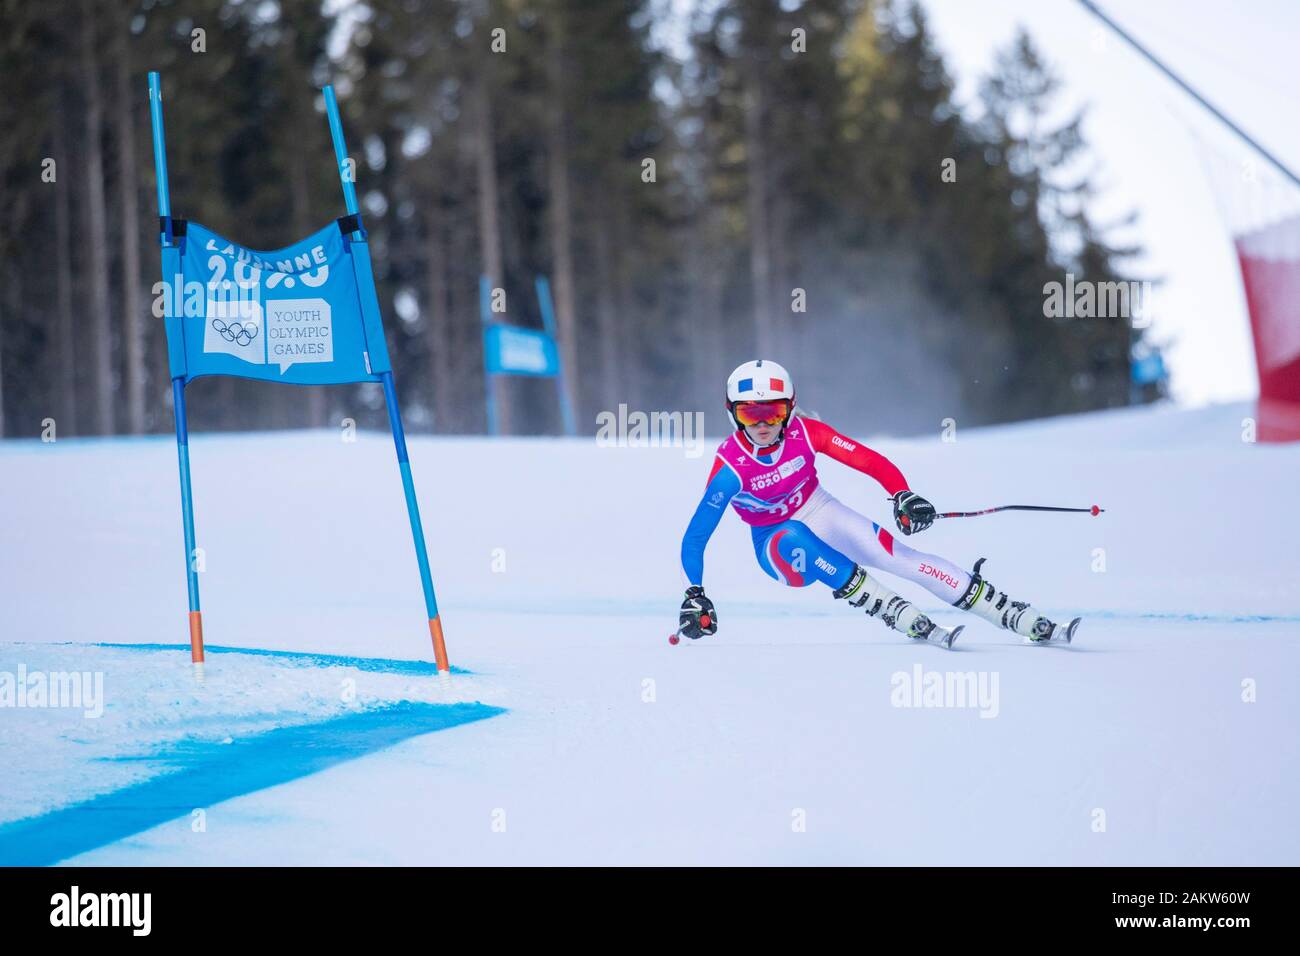 Alpine skier, Alizee Dahon, FRA competes in the Lausanne 2020 Women's Super G Downhill Skiing At Les Diablerets Alpine Centre In Switzerland Stock Photo